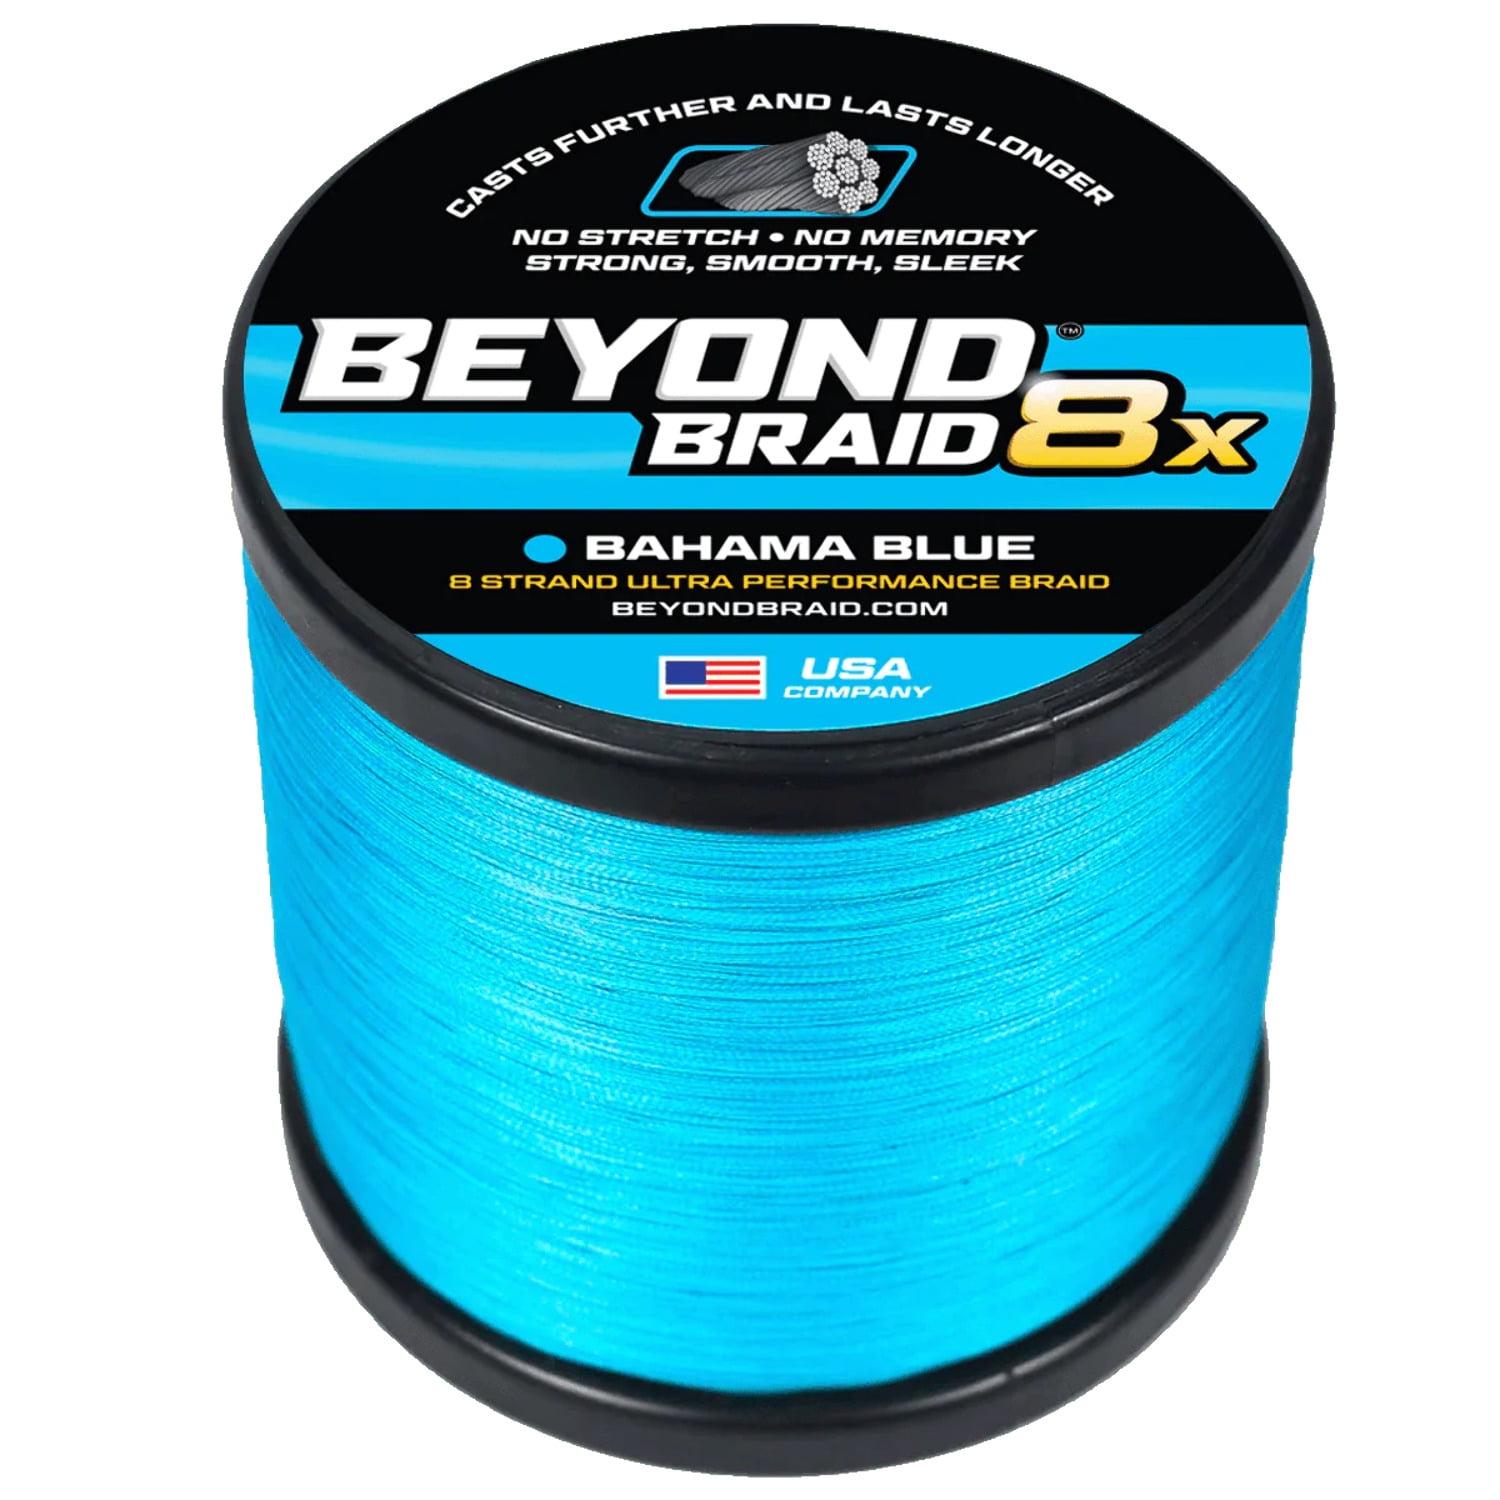 Beyond Braid Braided Fishing Line - Abrasion Resistant - No Stretch - Super  Strong - Thin Diameter SuperLine- Camo - 4 Strand & 8 Strand Braided Line  (Green 8X, 50LB 2000 (Yards)) 